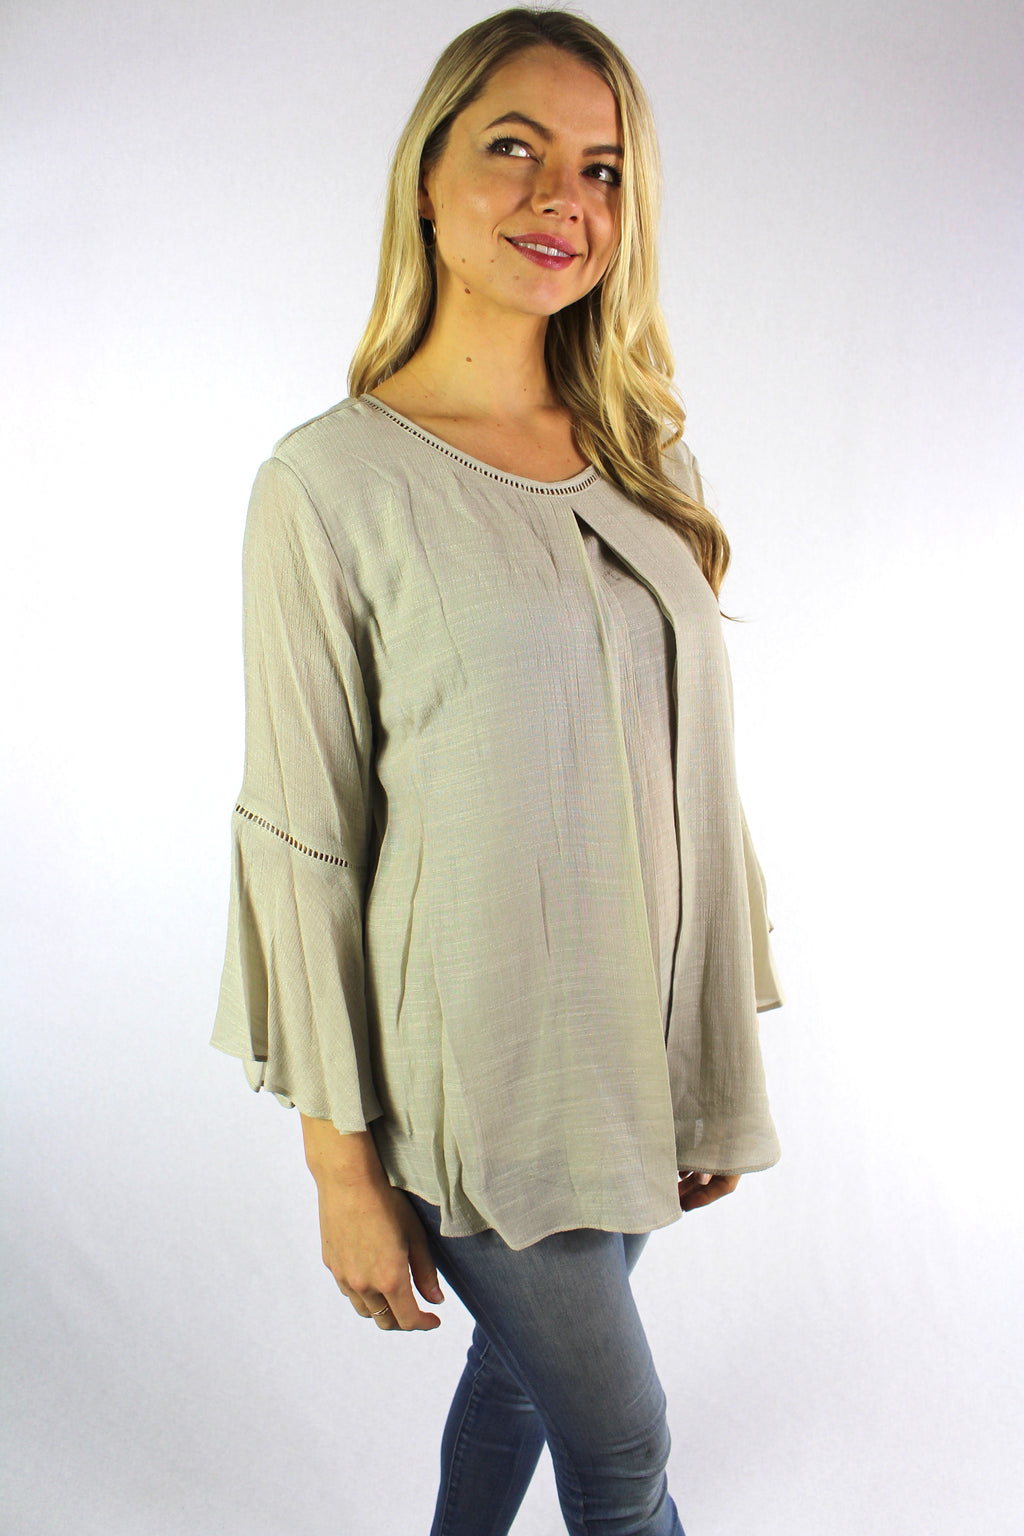 Women's Bell Sleeve Round Neck Blouse